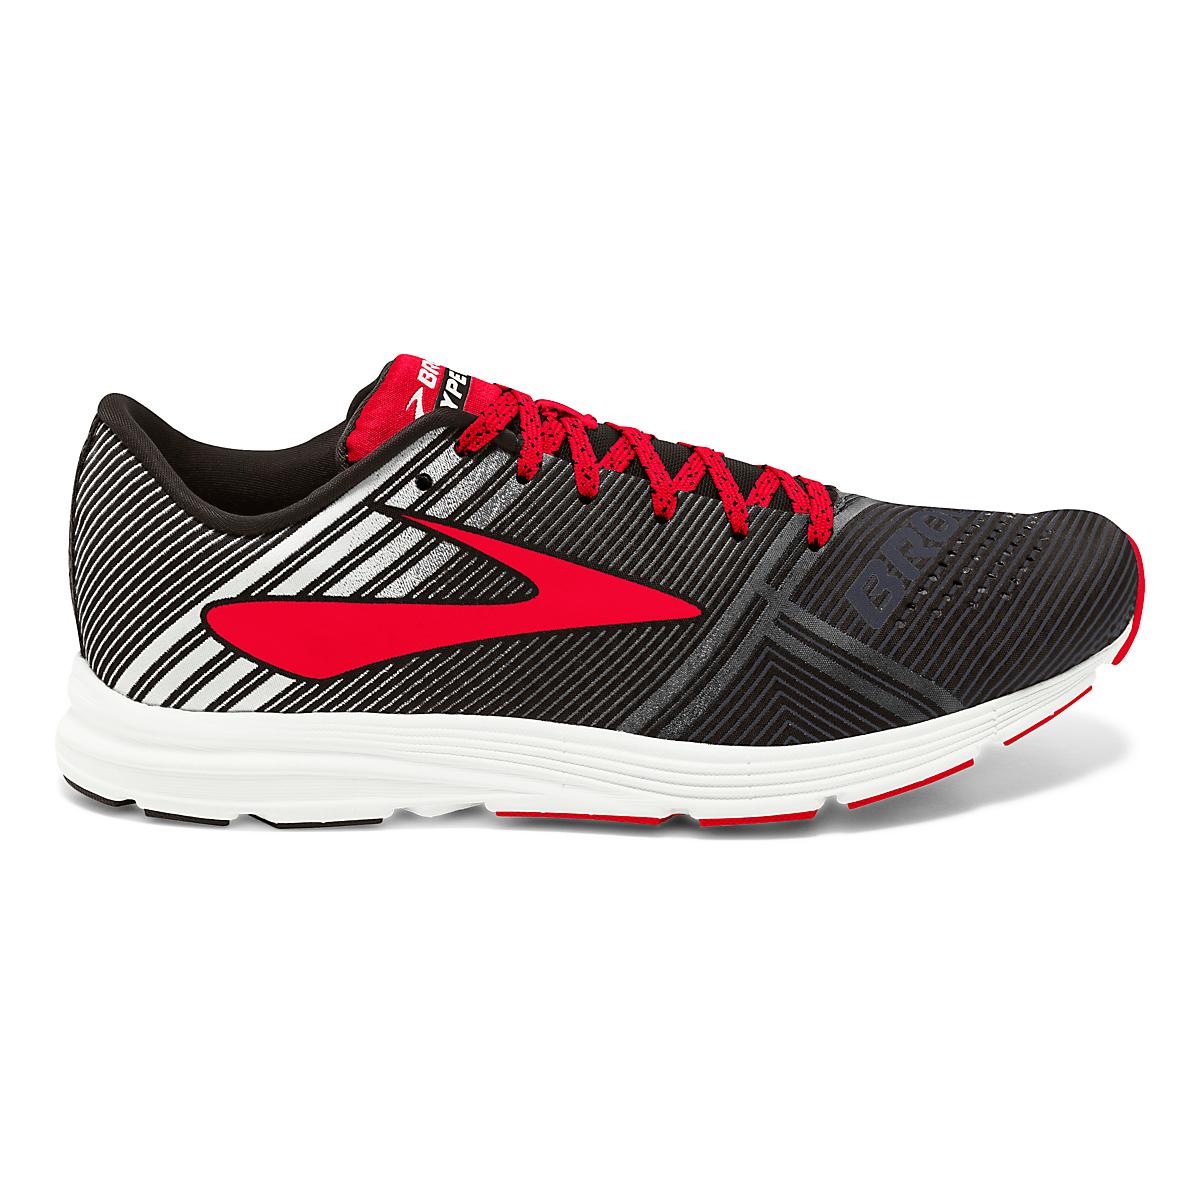 Mens Brooks Hyperion Racing Shoe at Road Runner Sports